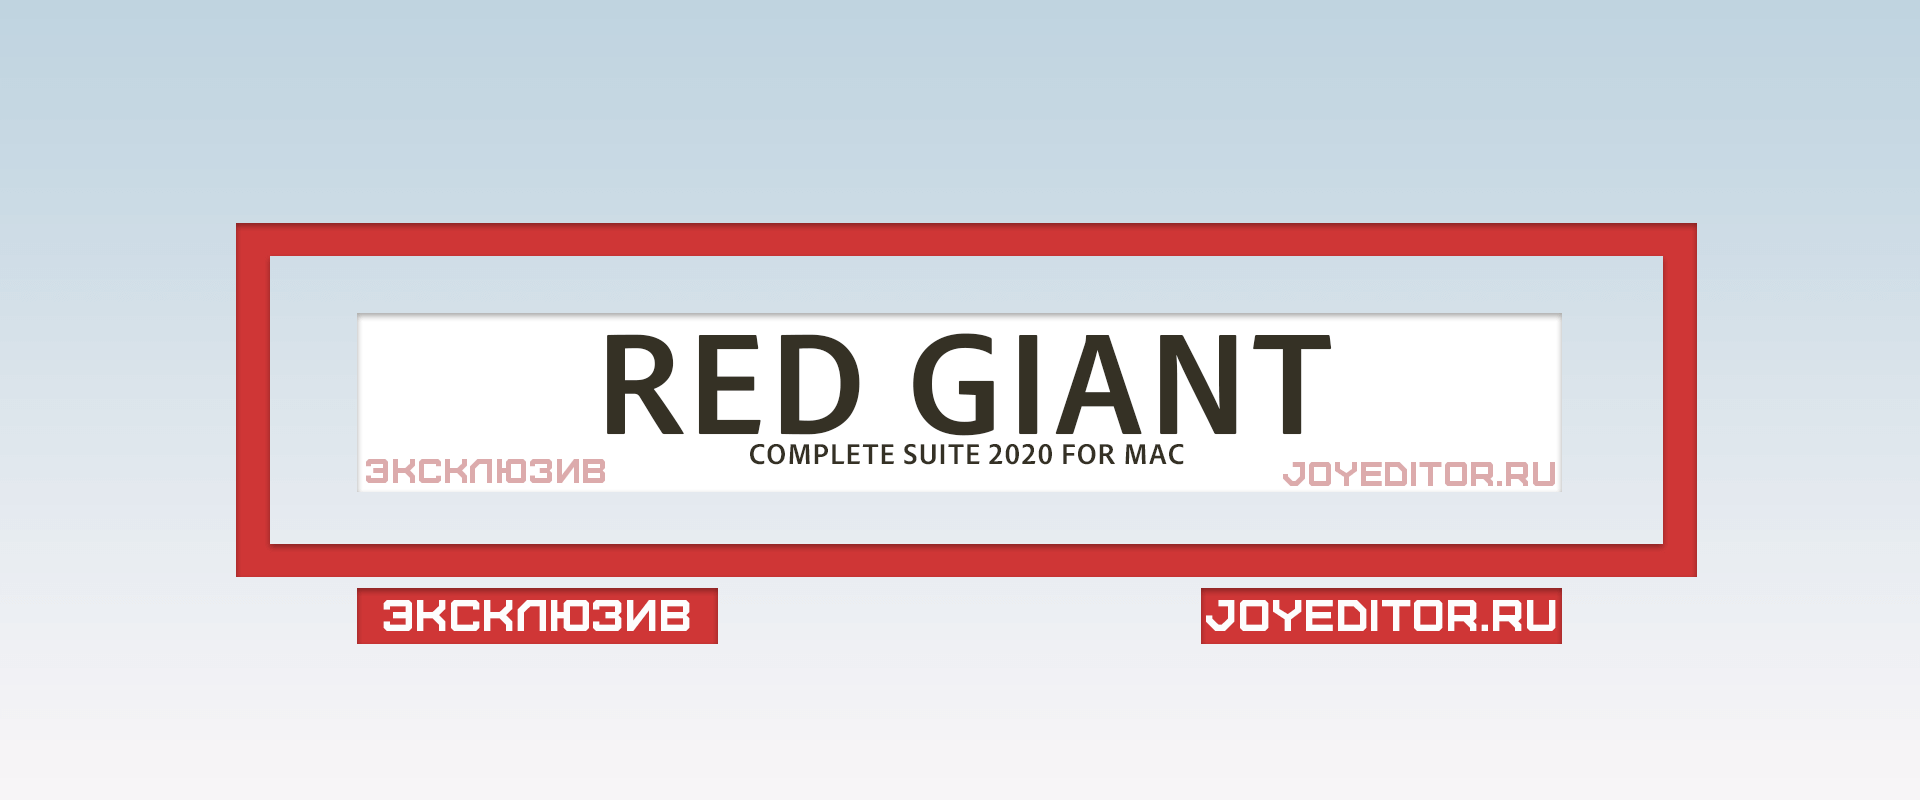 RED GIANT COMPLETE SUITE 2020 FOR MAC